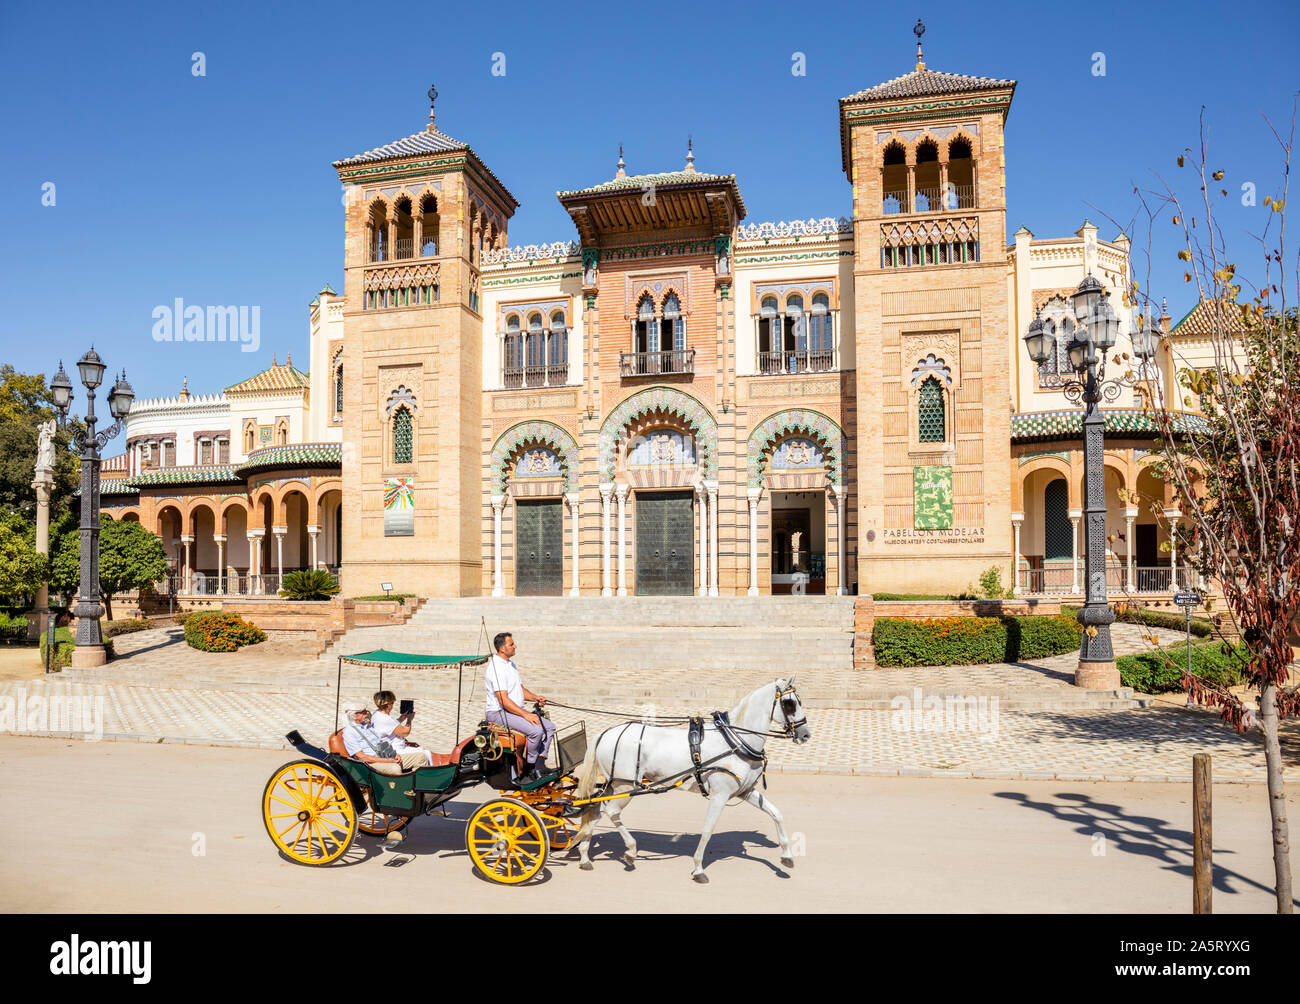 Seville Tourists on a Seville carriage ride outside the Museum of Popular Arts and Traditions Sevilla Seville Spain seville Andalusia Spain EU Europe Stock Photo